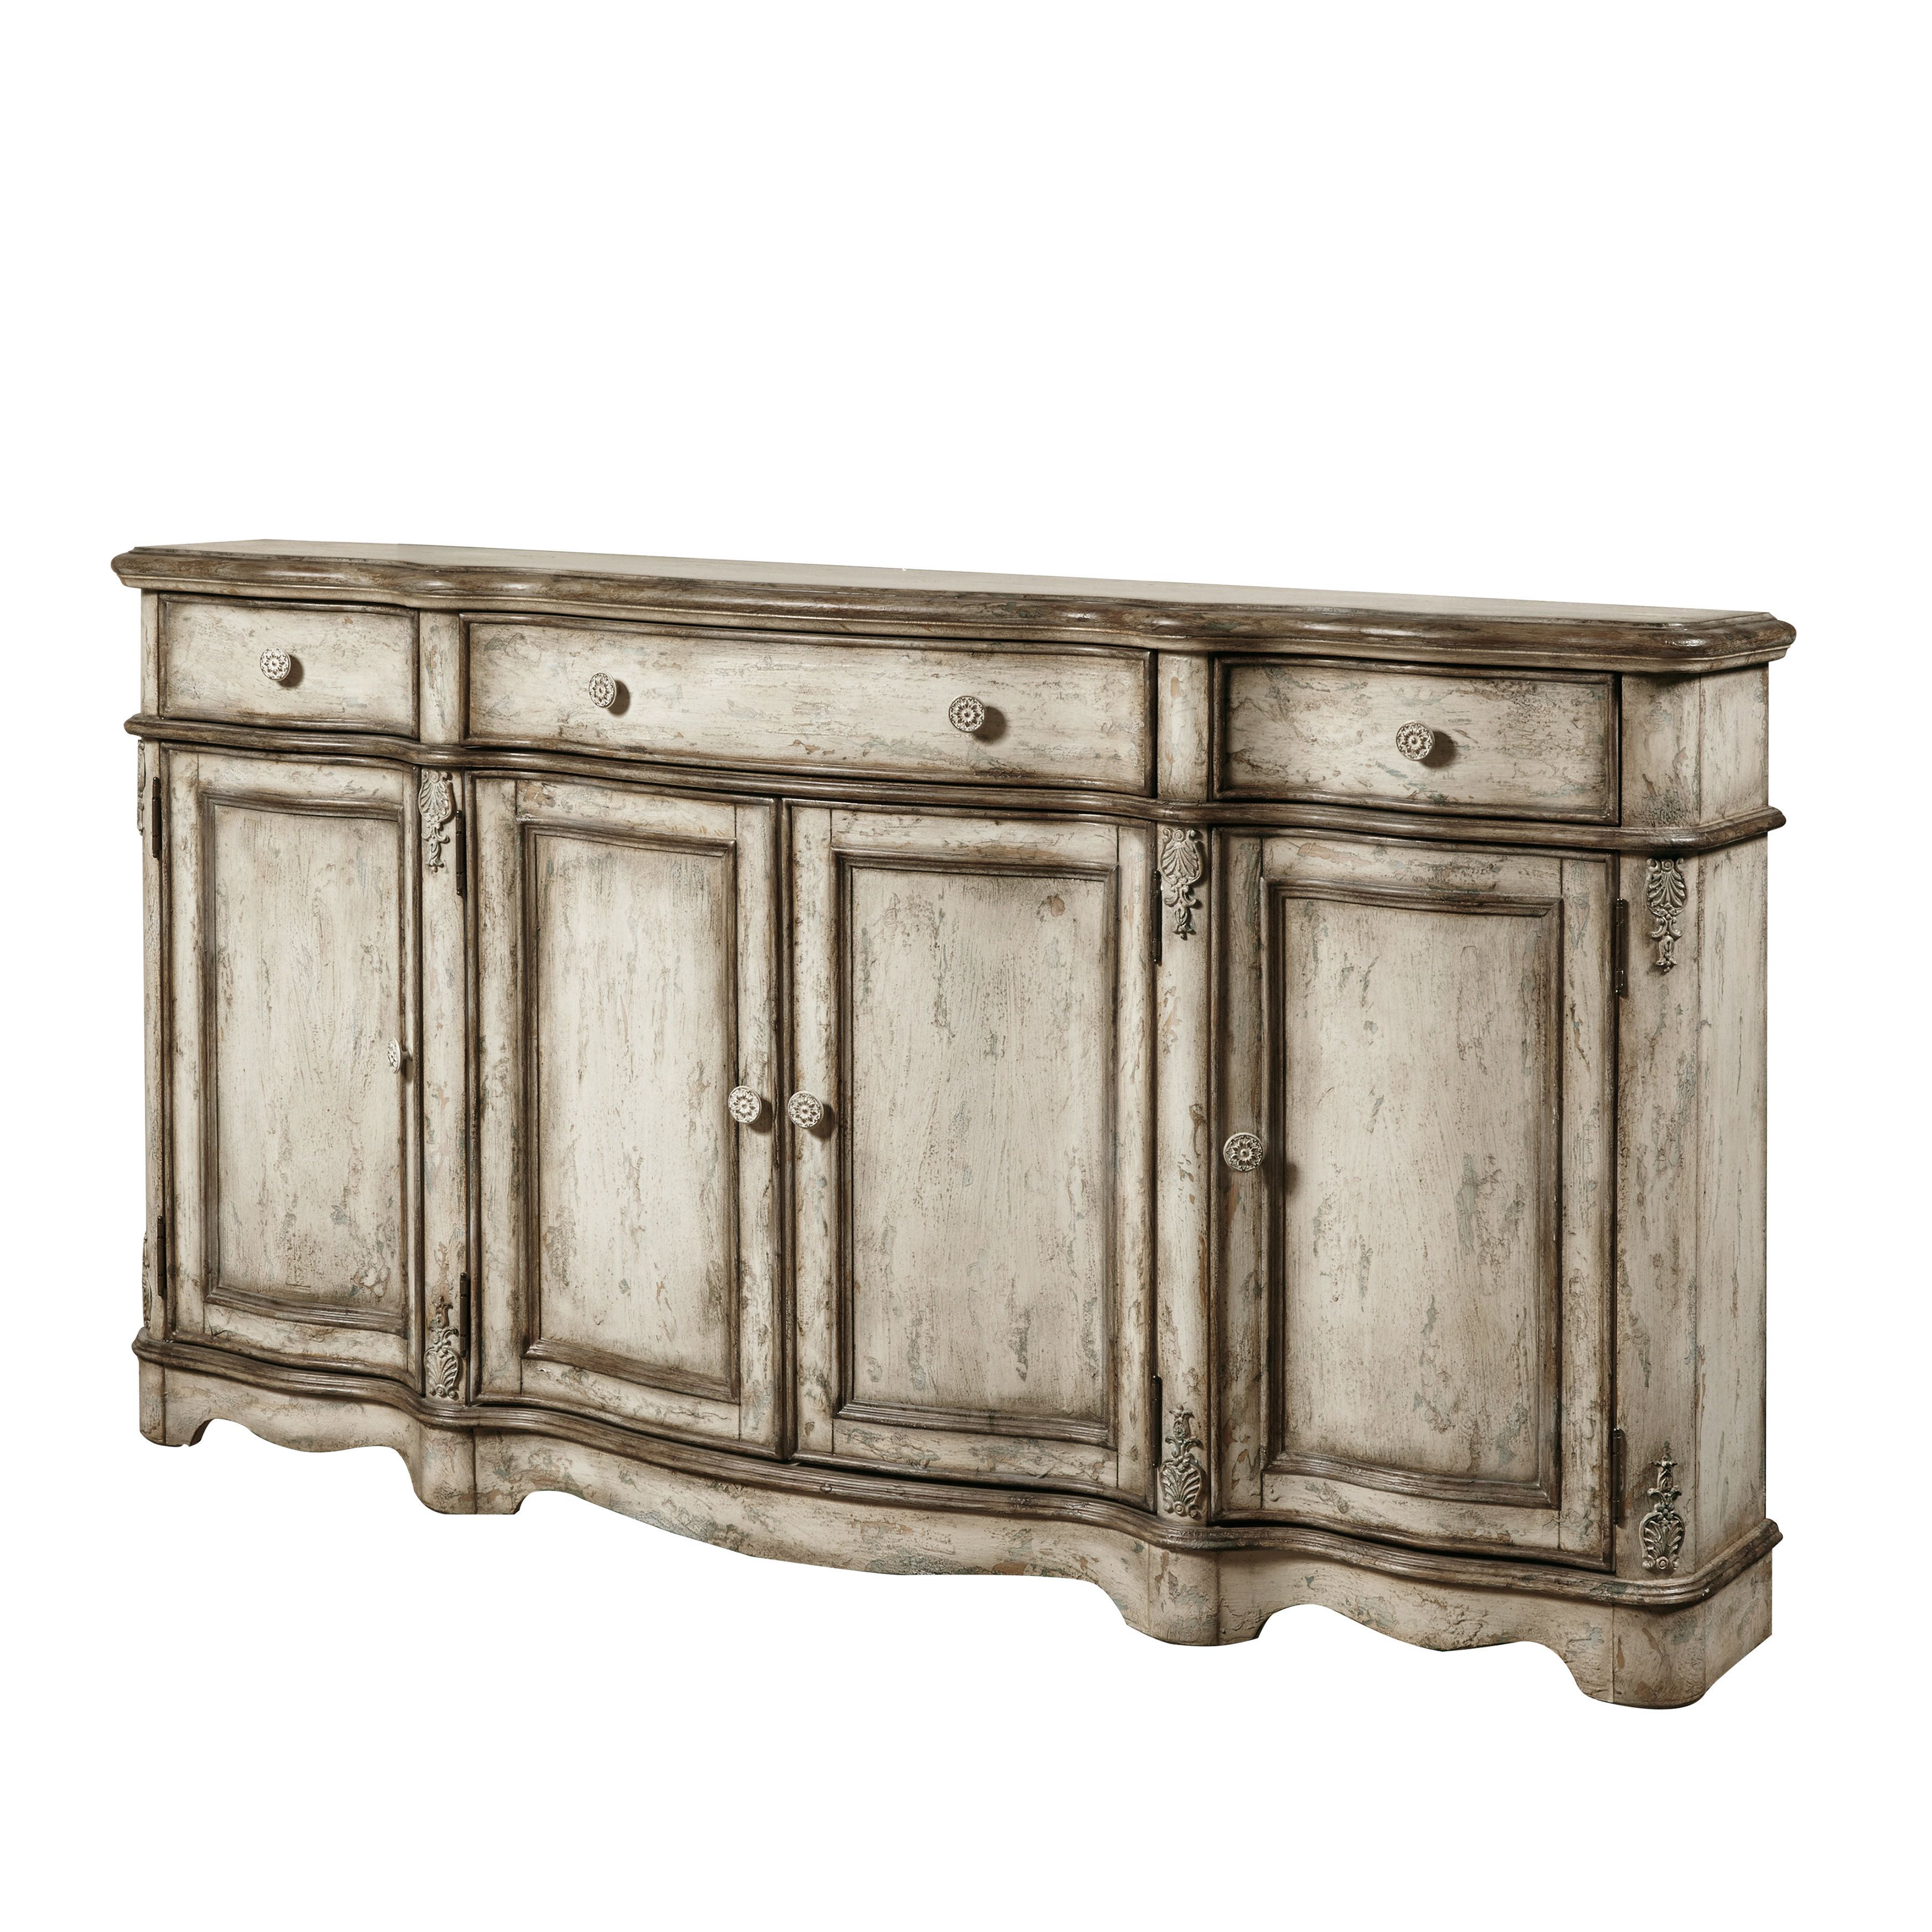 Farmhouse & Rustic Lark Manor Sideboards & Buffets | Birch Lane In Raquette Sideboards (View 13 of 30)